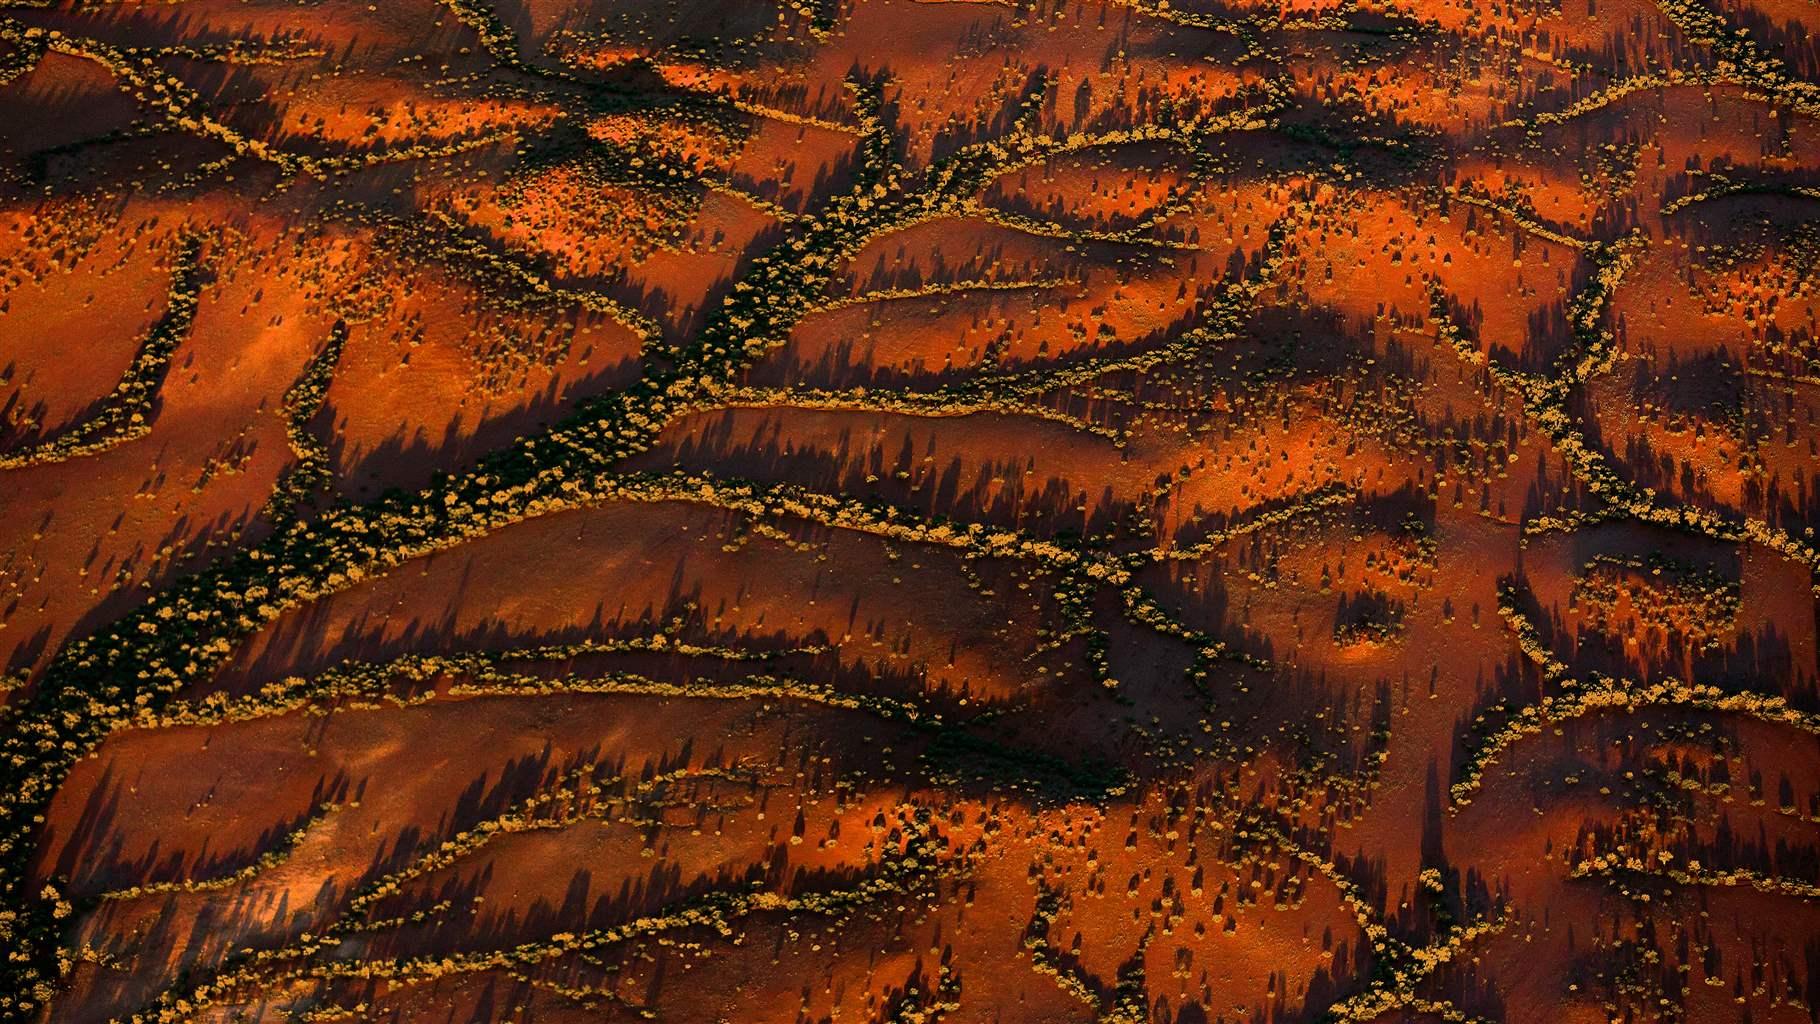 An aerial photograph shows a gully system in Western Australia, with vegetation growing in the gullies and deep red-and-brown dirt.